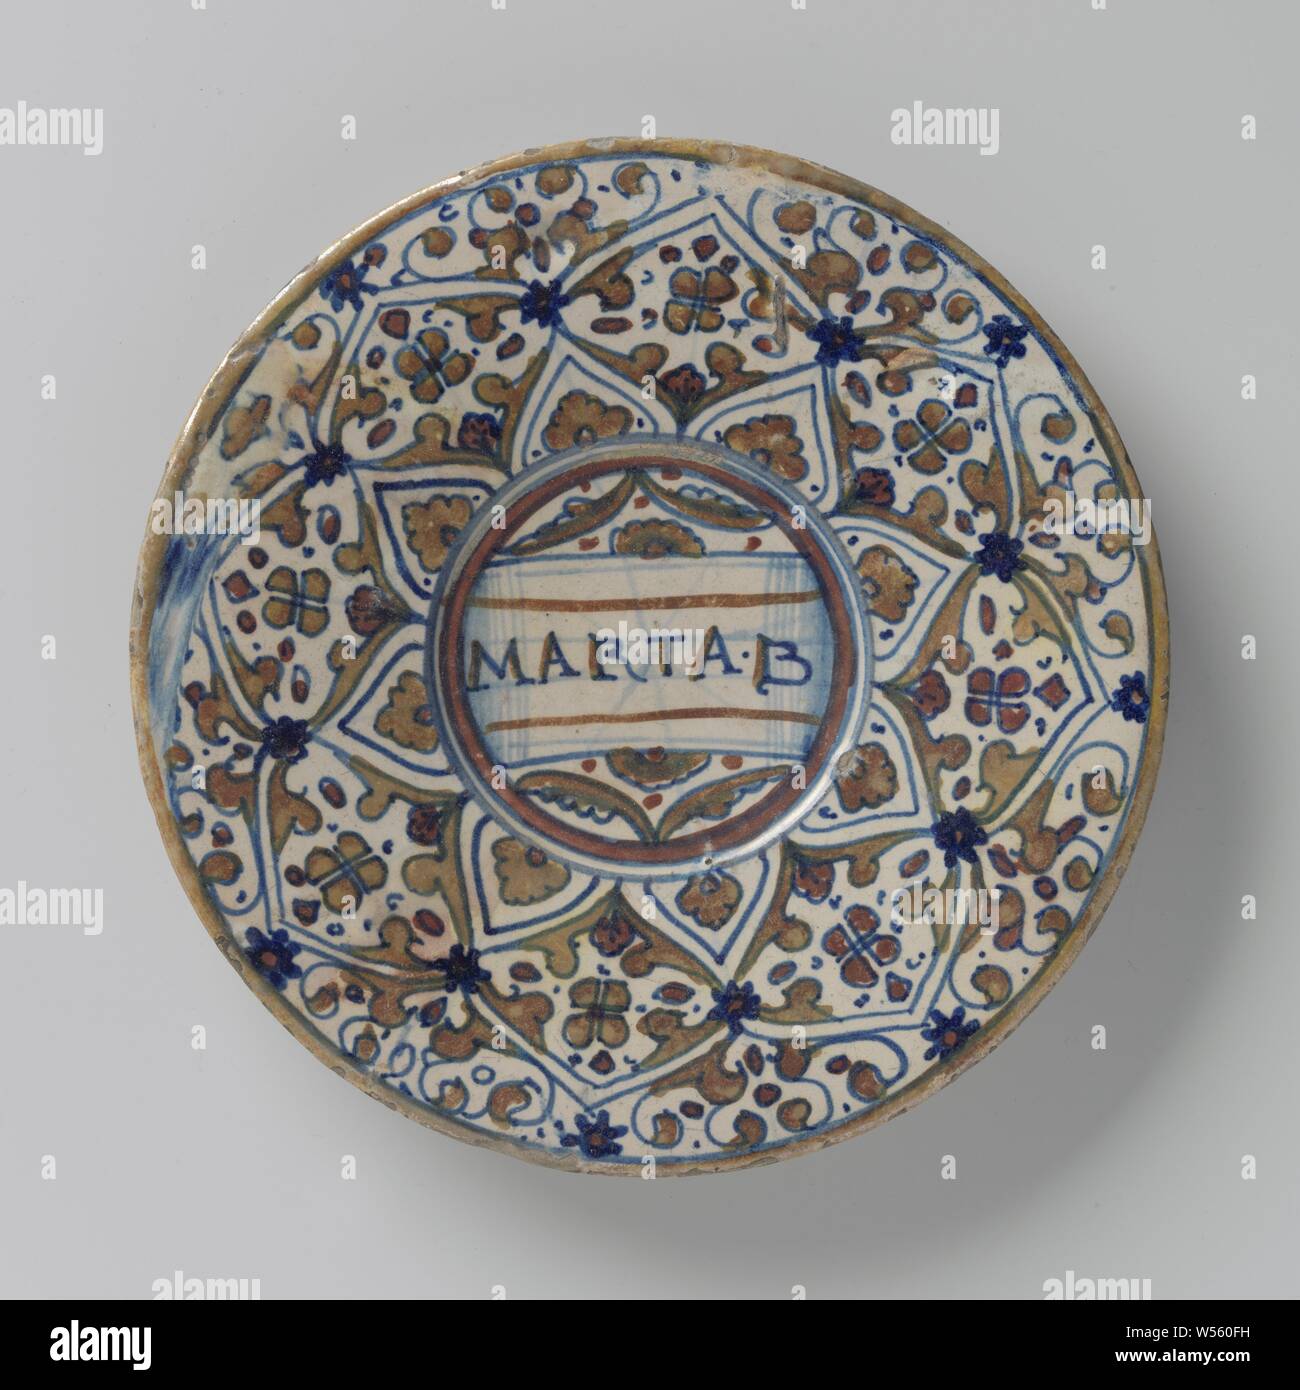 Plate, multicolored painted with round diamond-shaped compartments with leaf motifs inside and with inscription: MARTA.B, Round plate of multicolored majolica. A circle has been painted in the middle with the inscription: 'MARTA.B'. Round diamond-shaped boxes are painted around the circle, including leaf motifs., anonymous, Gabbio, c. 1530 - c. 1540, earthenware, tin glaze, lead glaze, d 22.3 cm × h 2.4 cm Stock Photo